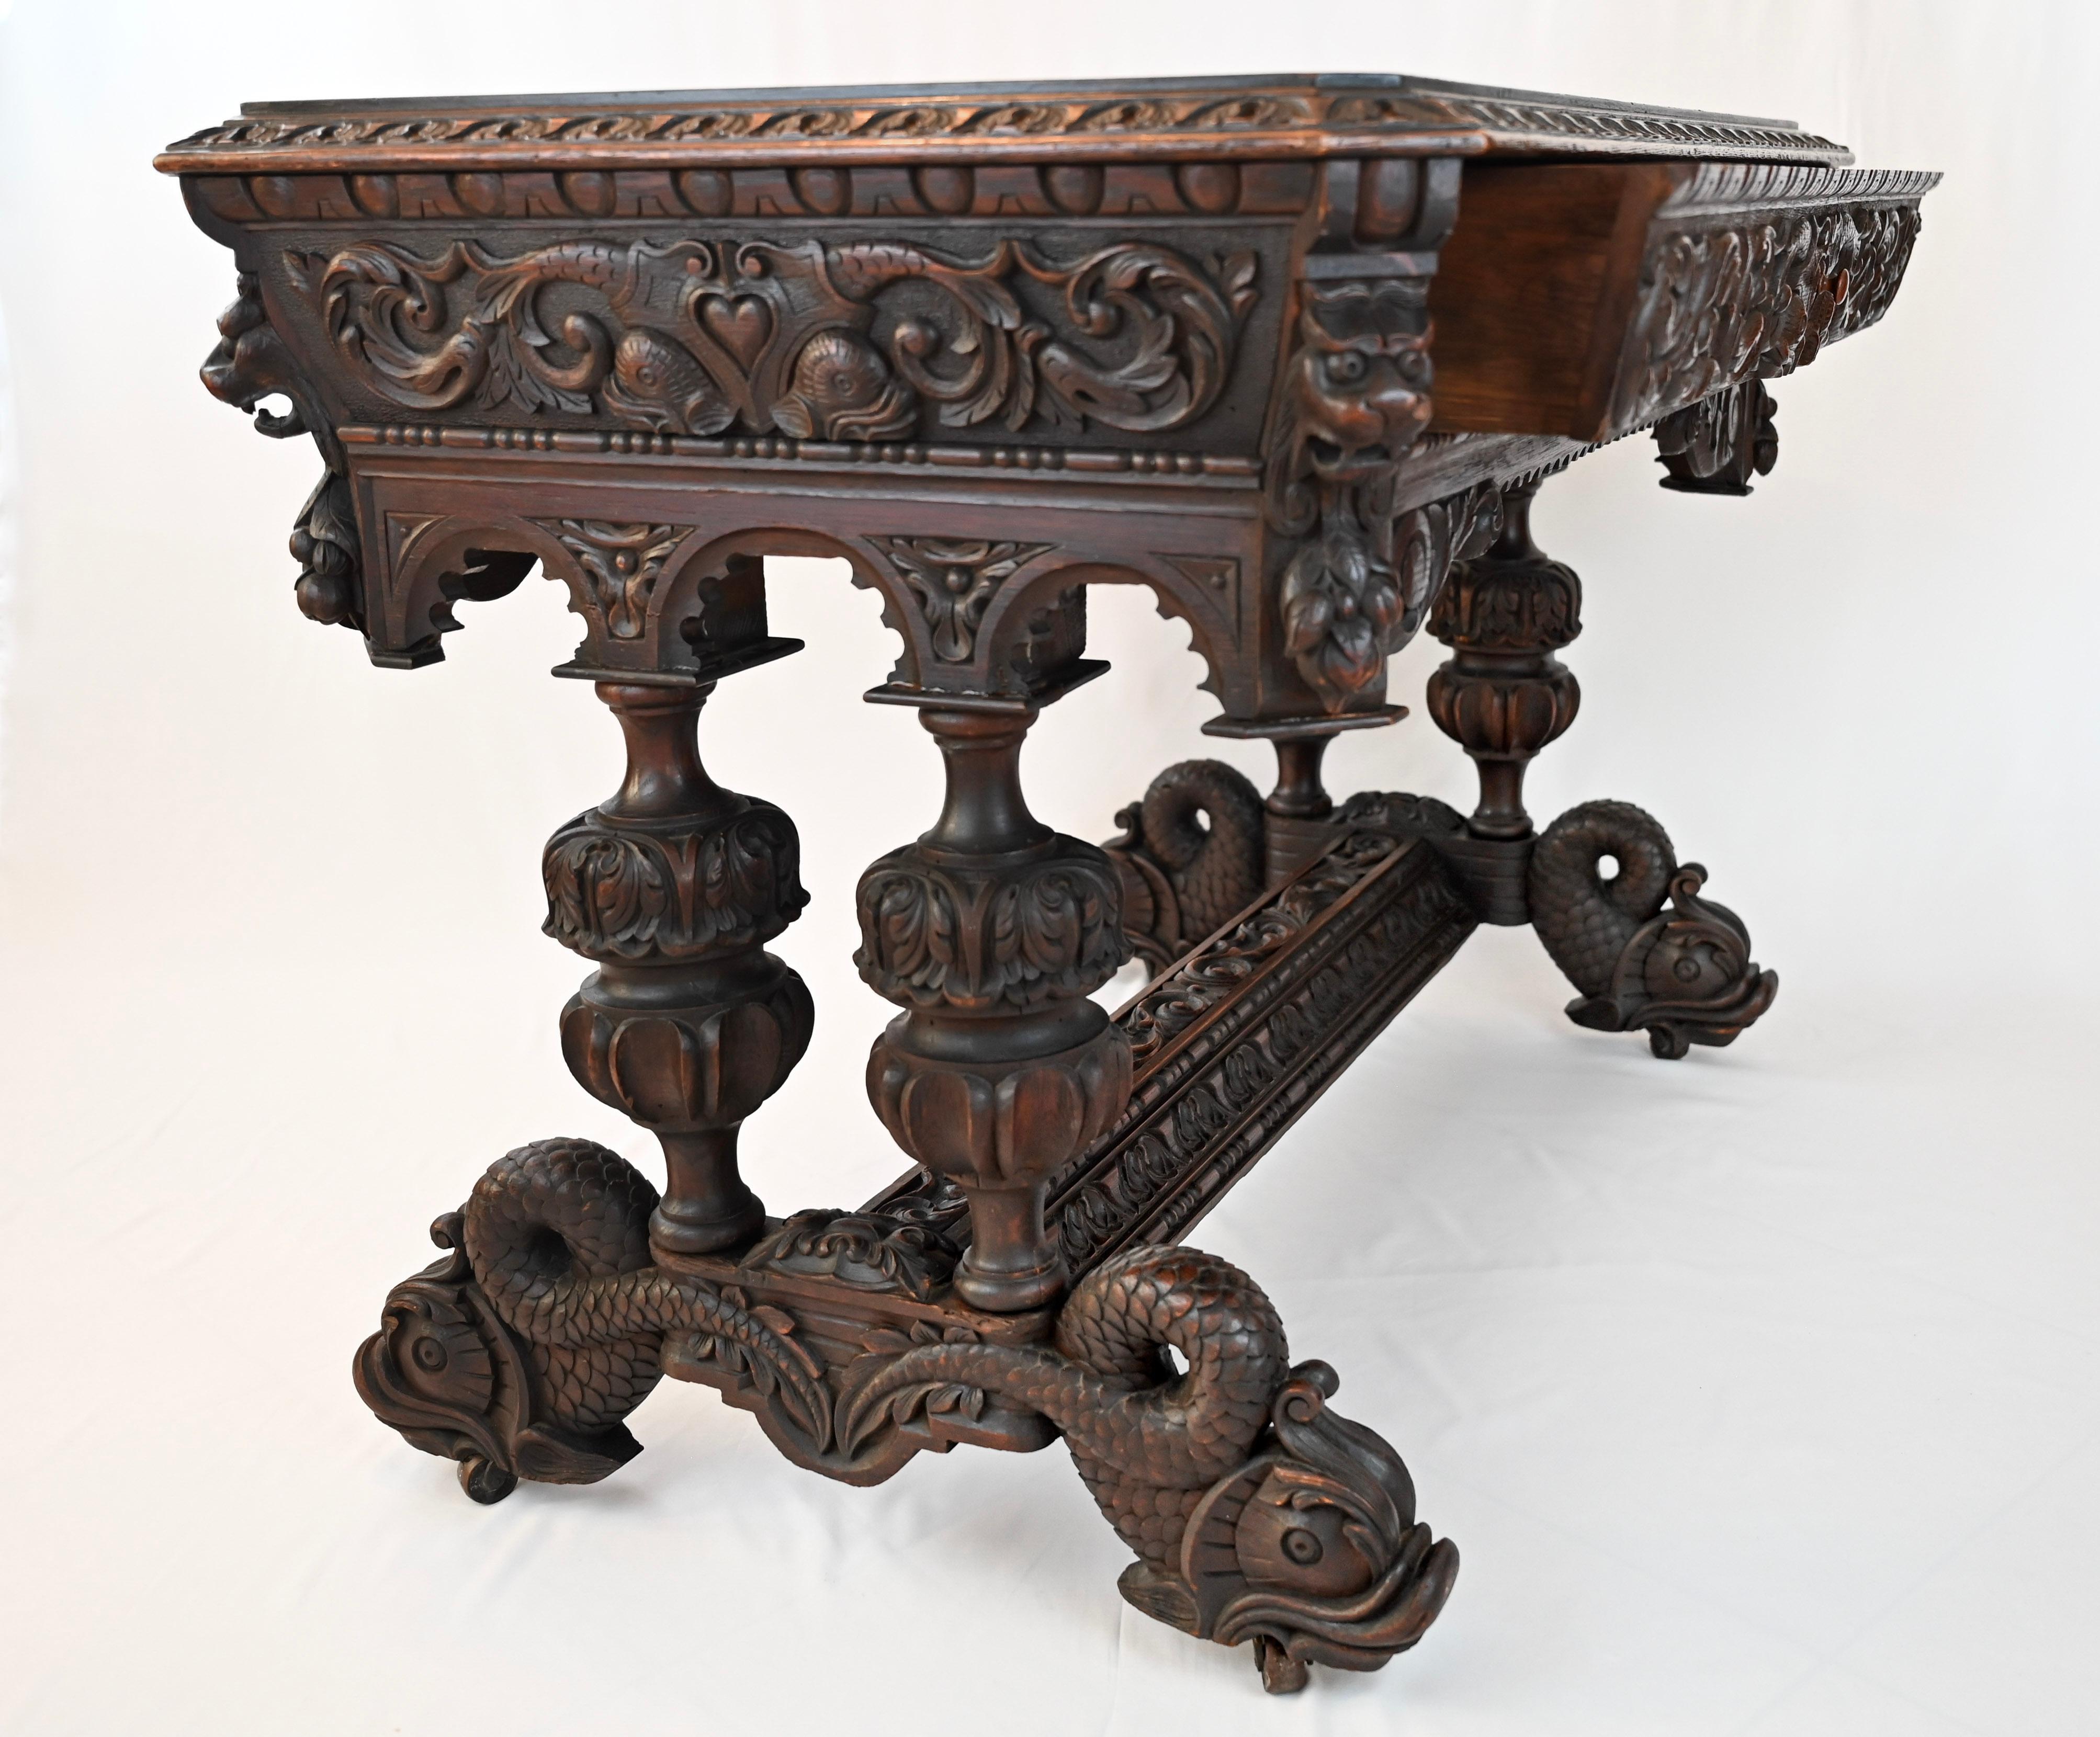 A stunning 19th century French carved oak Dolphin library table desk Renaissance Gothic style. 

Direct from France, an elegant antique French carved library table or writing desk, commonly referred to as a “dolphin